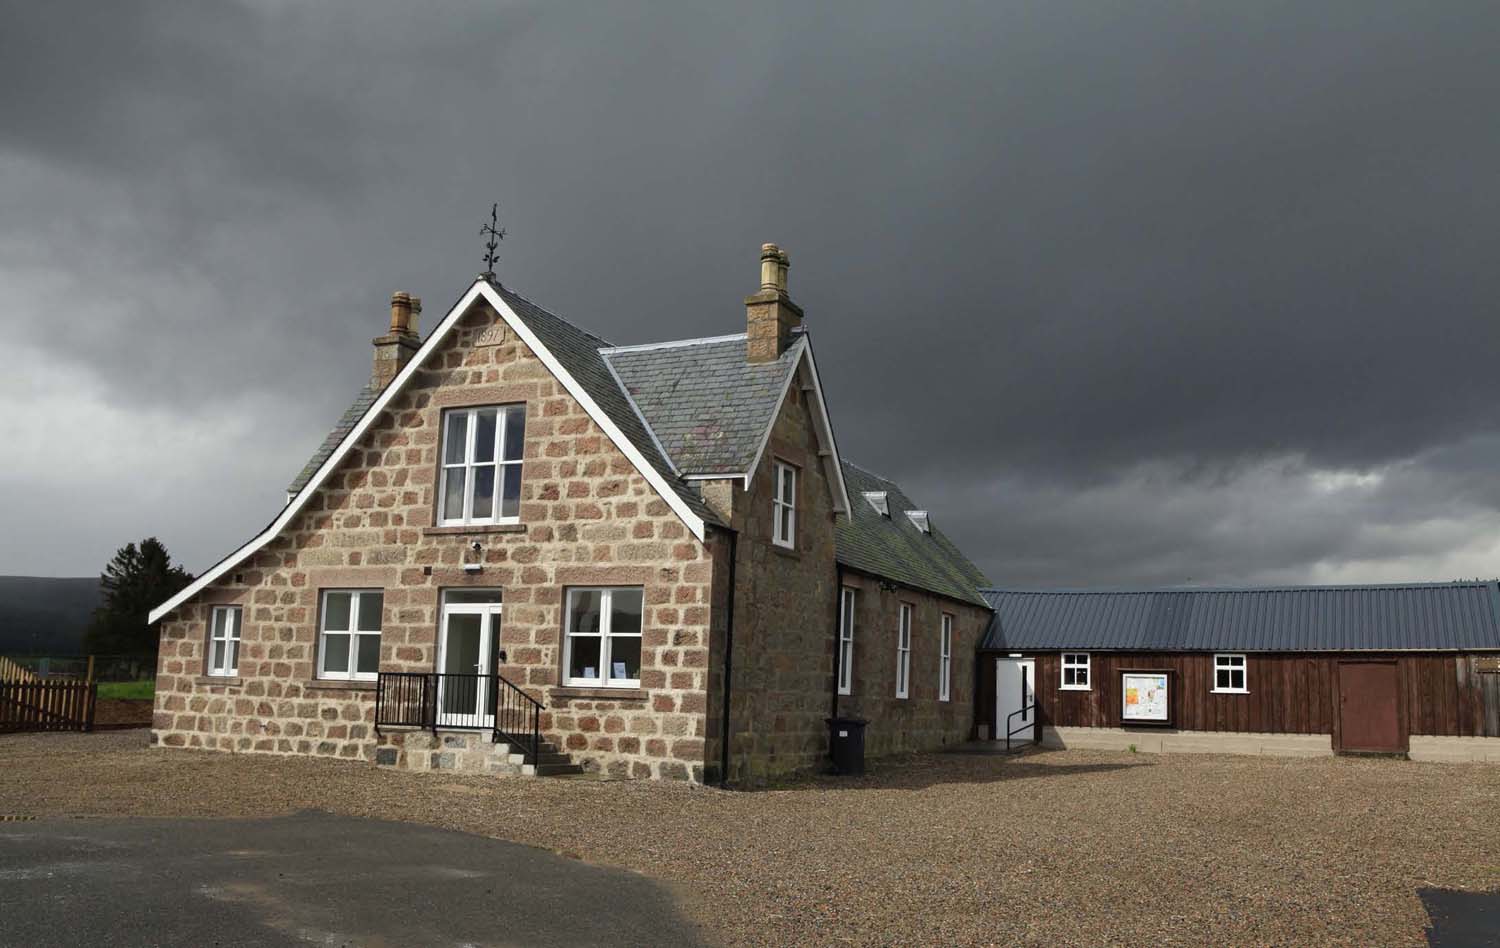 The exterior of a light grey stone building in the countryside with a dark grey sky above